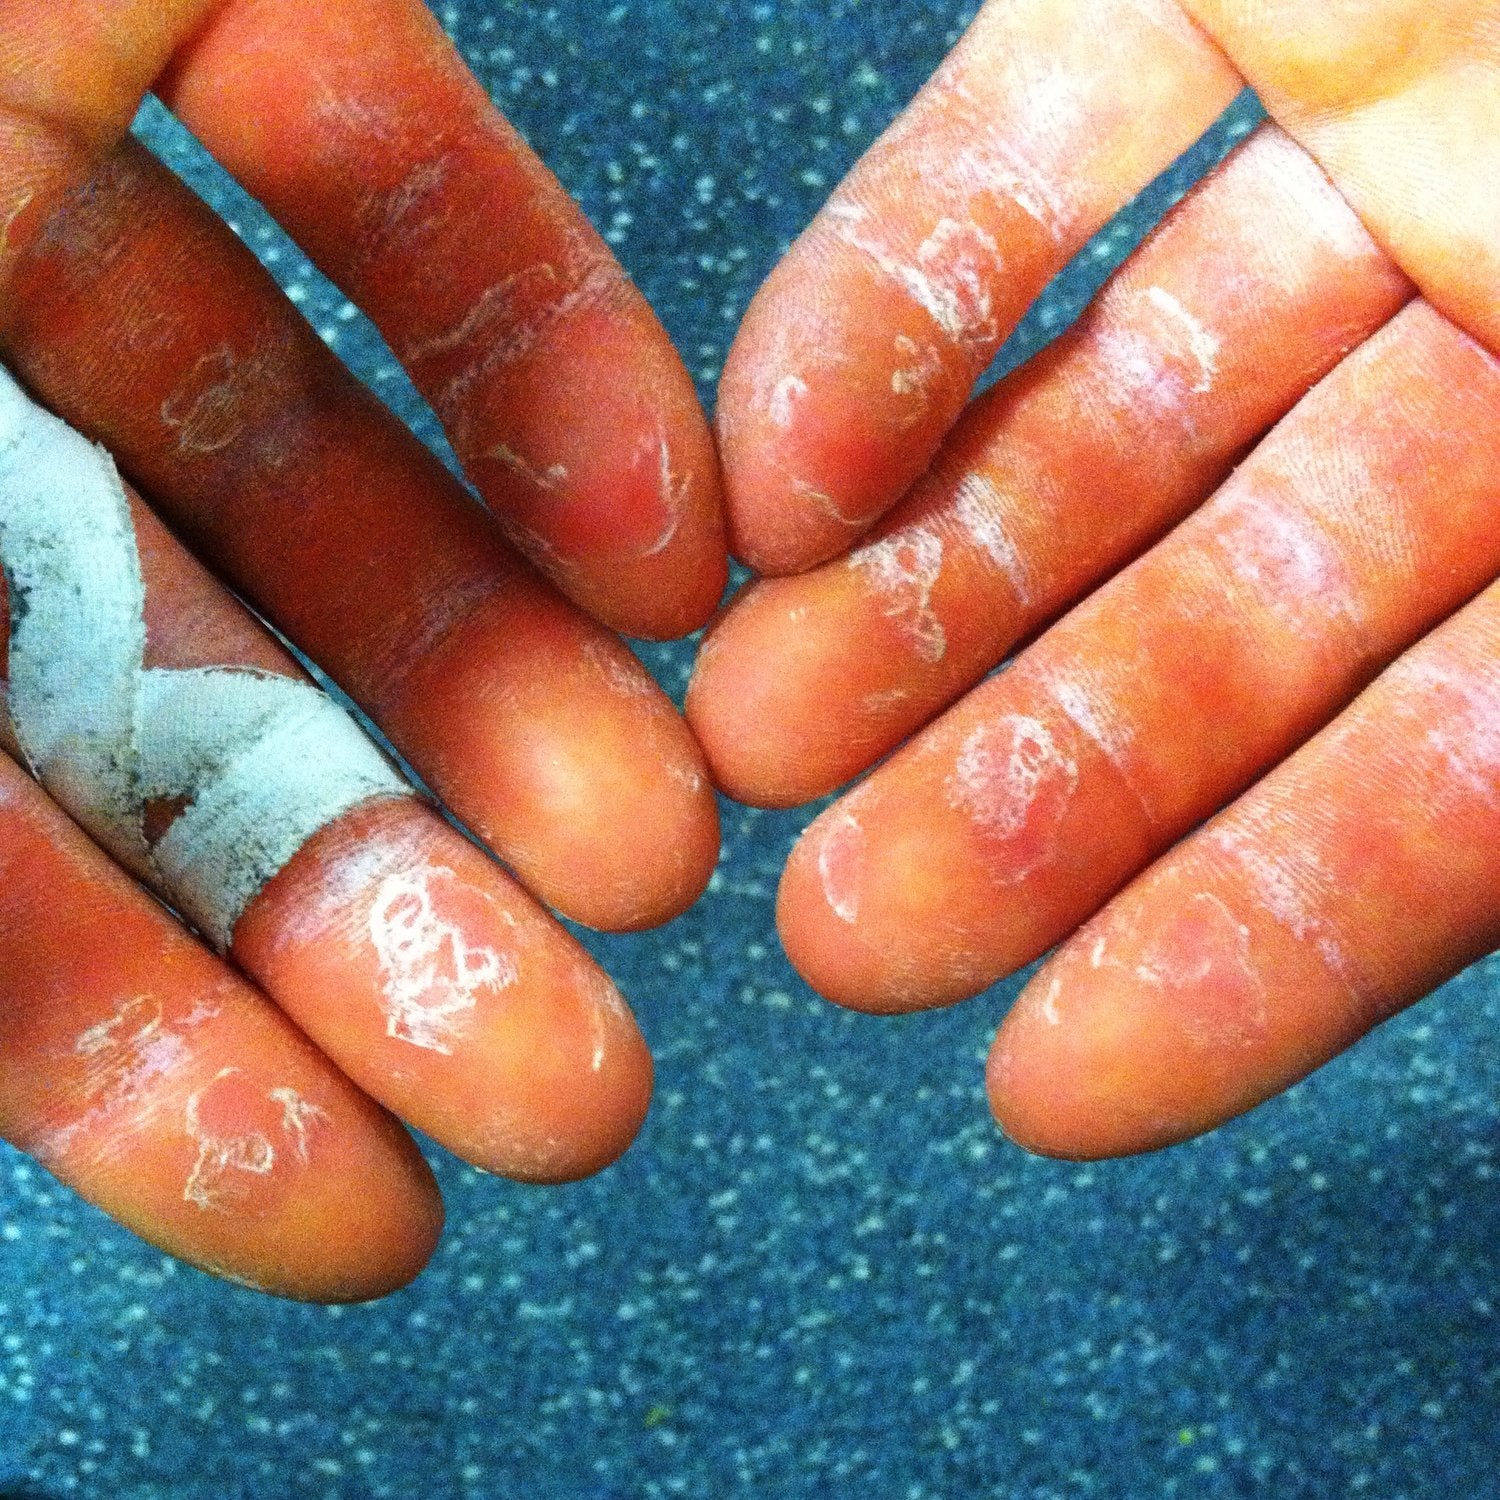 Rock Climbers: How to Care for Your Fingers + Hands - Skratch Labs